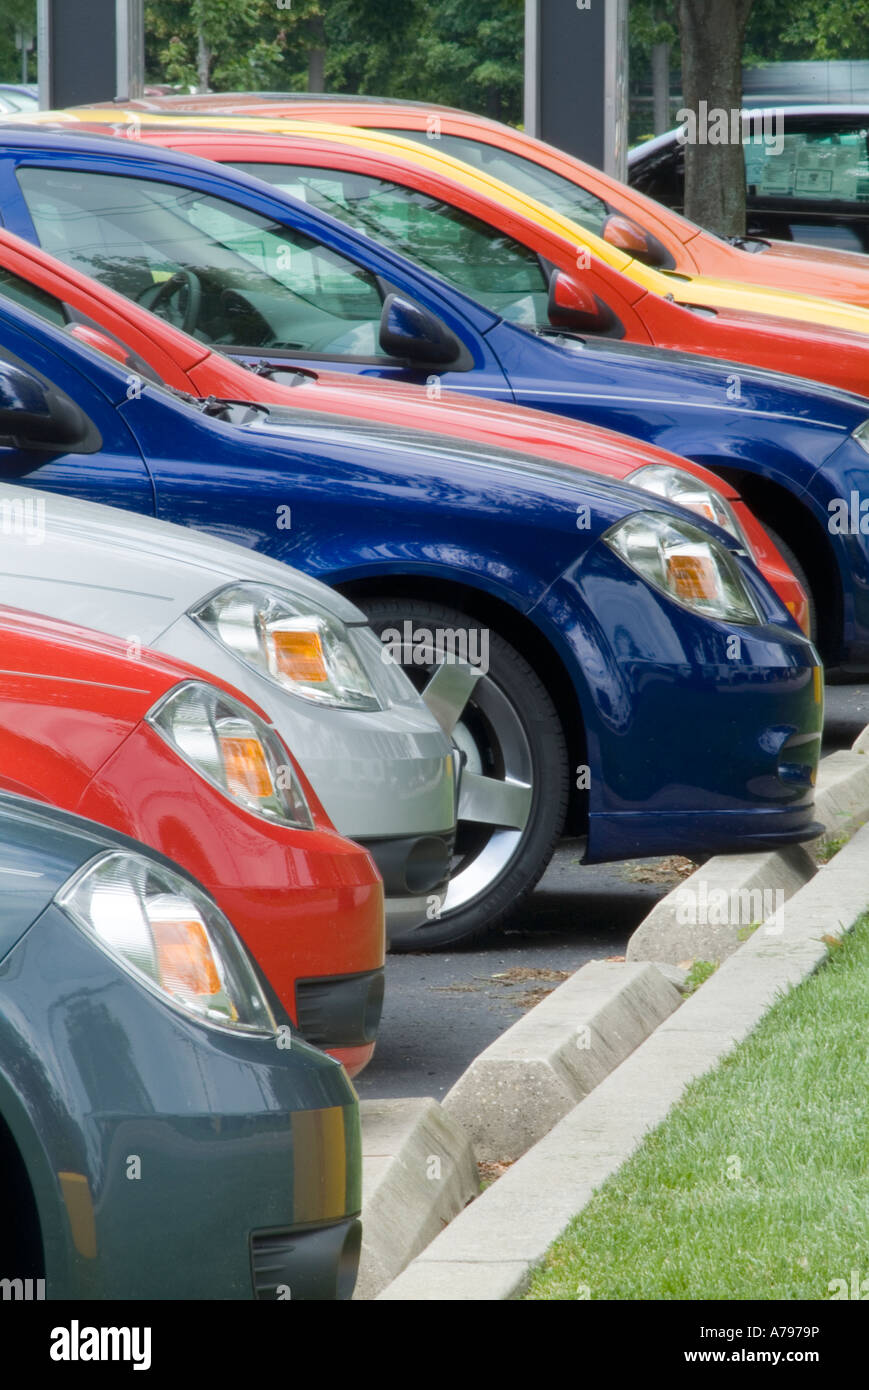 Rows Of New Cars For Sale In New Car Dealership Parking Lot Stock Photo